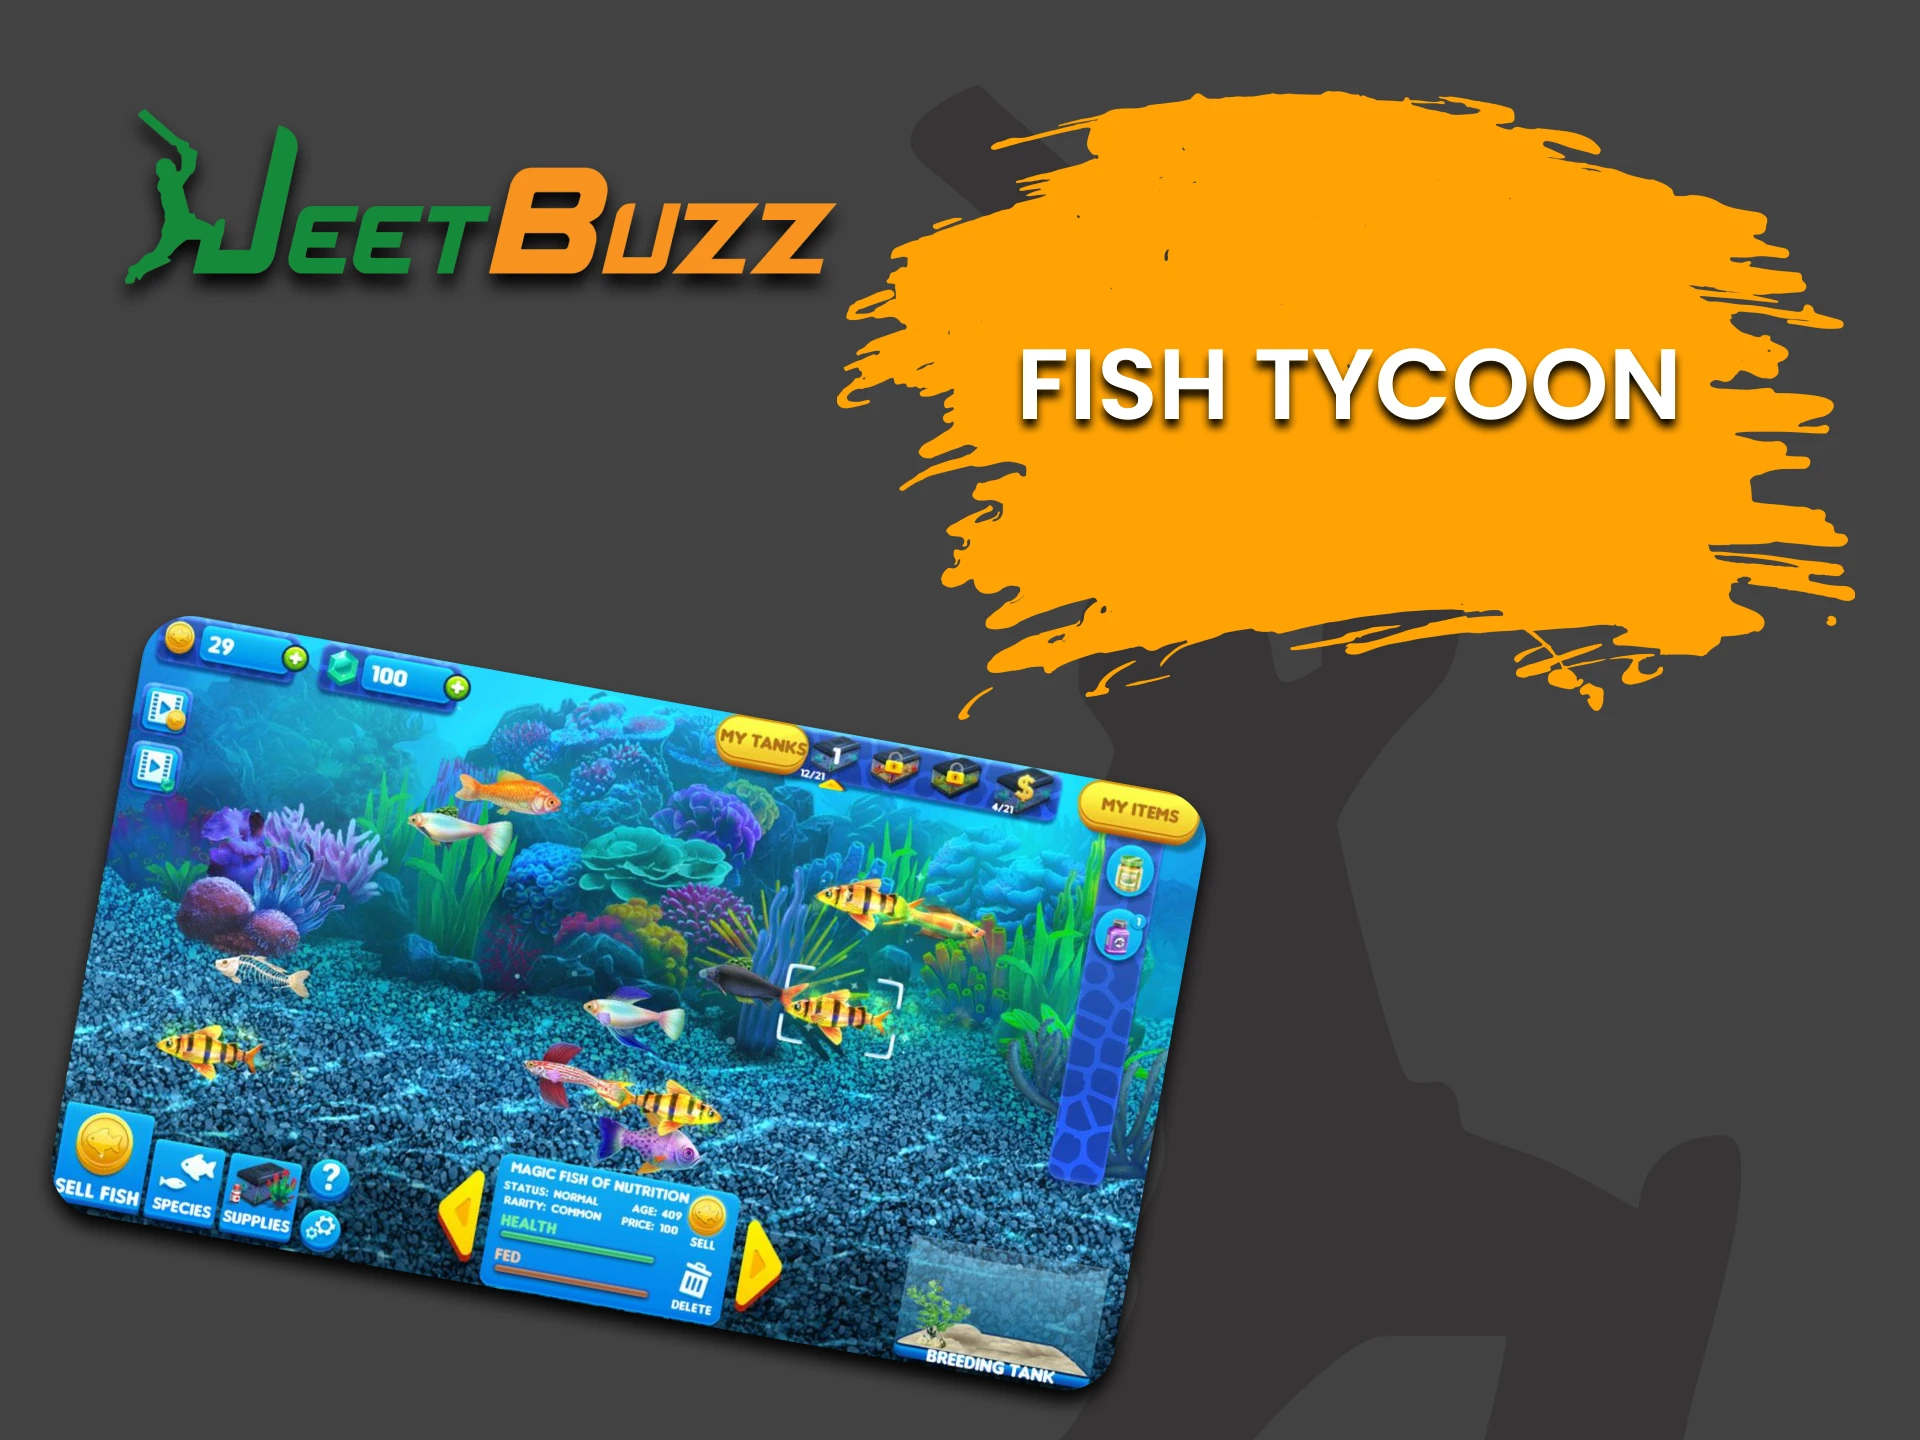 Try your hand at Fish Tycoon on JeetBuzz.